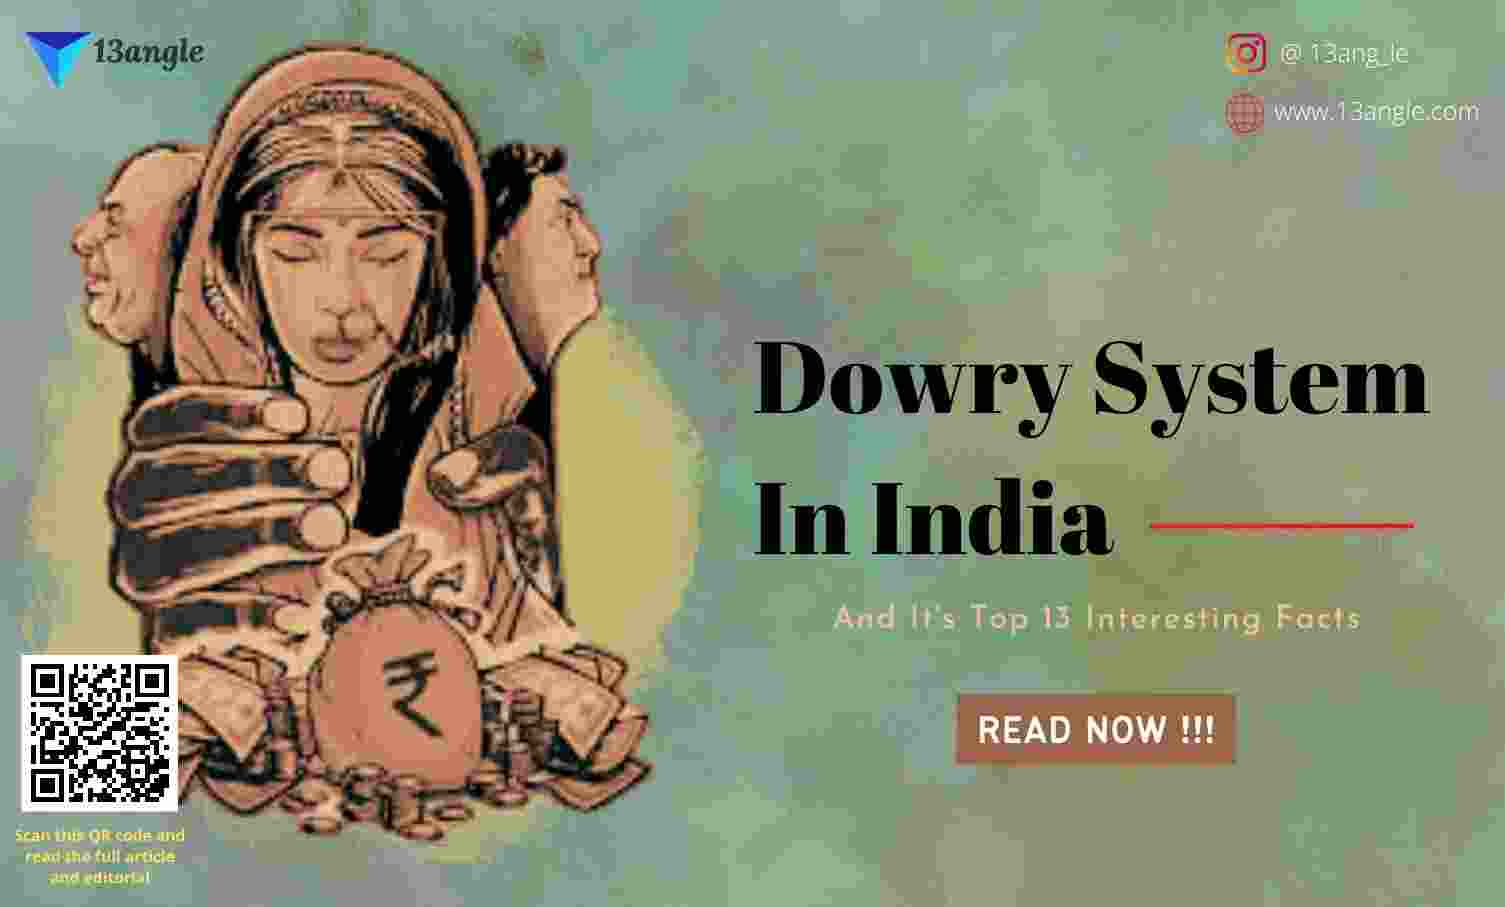 Dowry System In India- 13angle.com